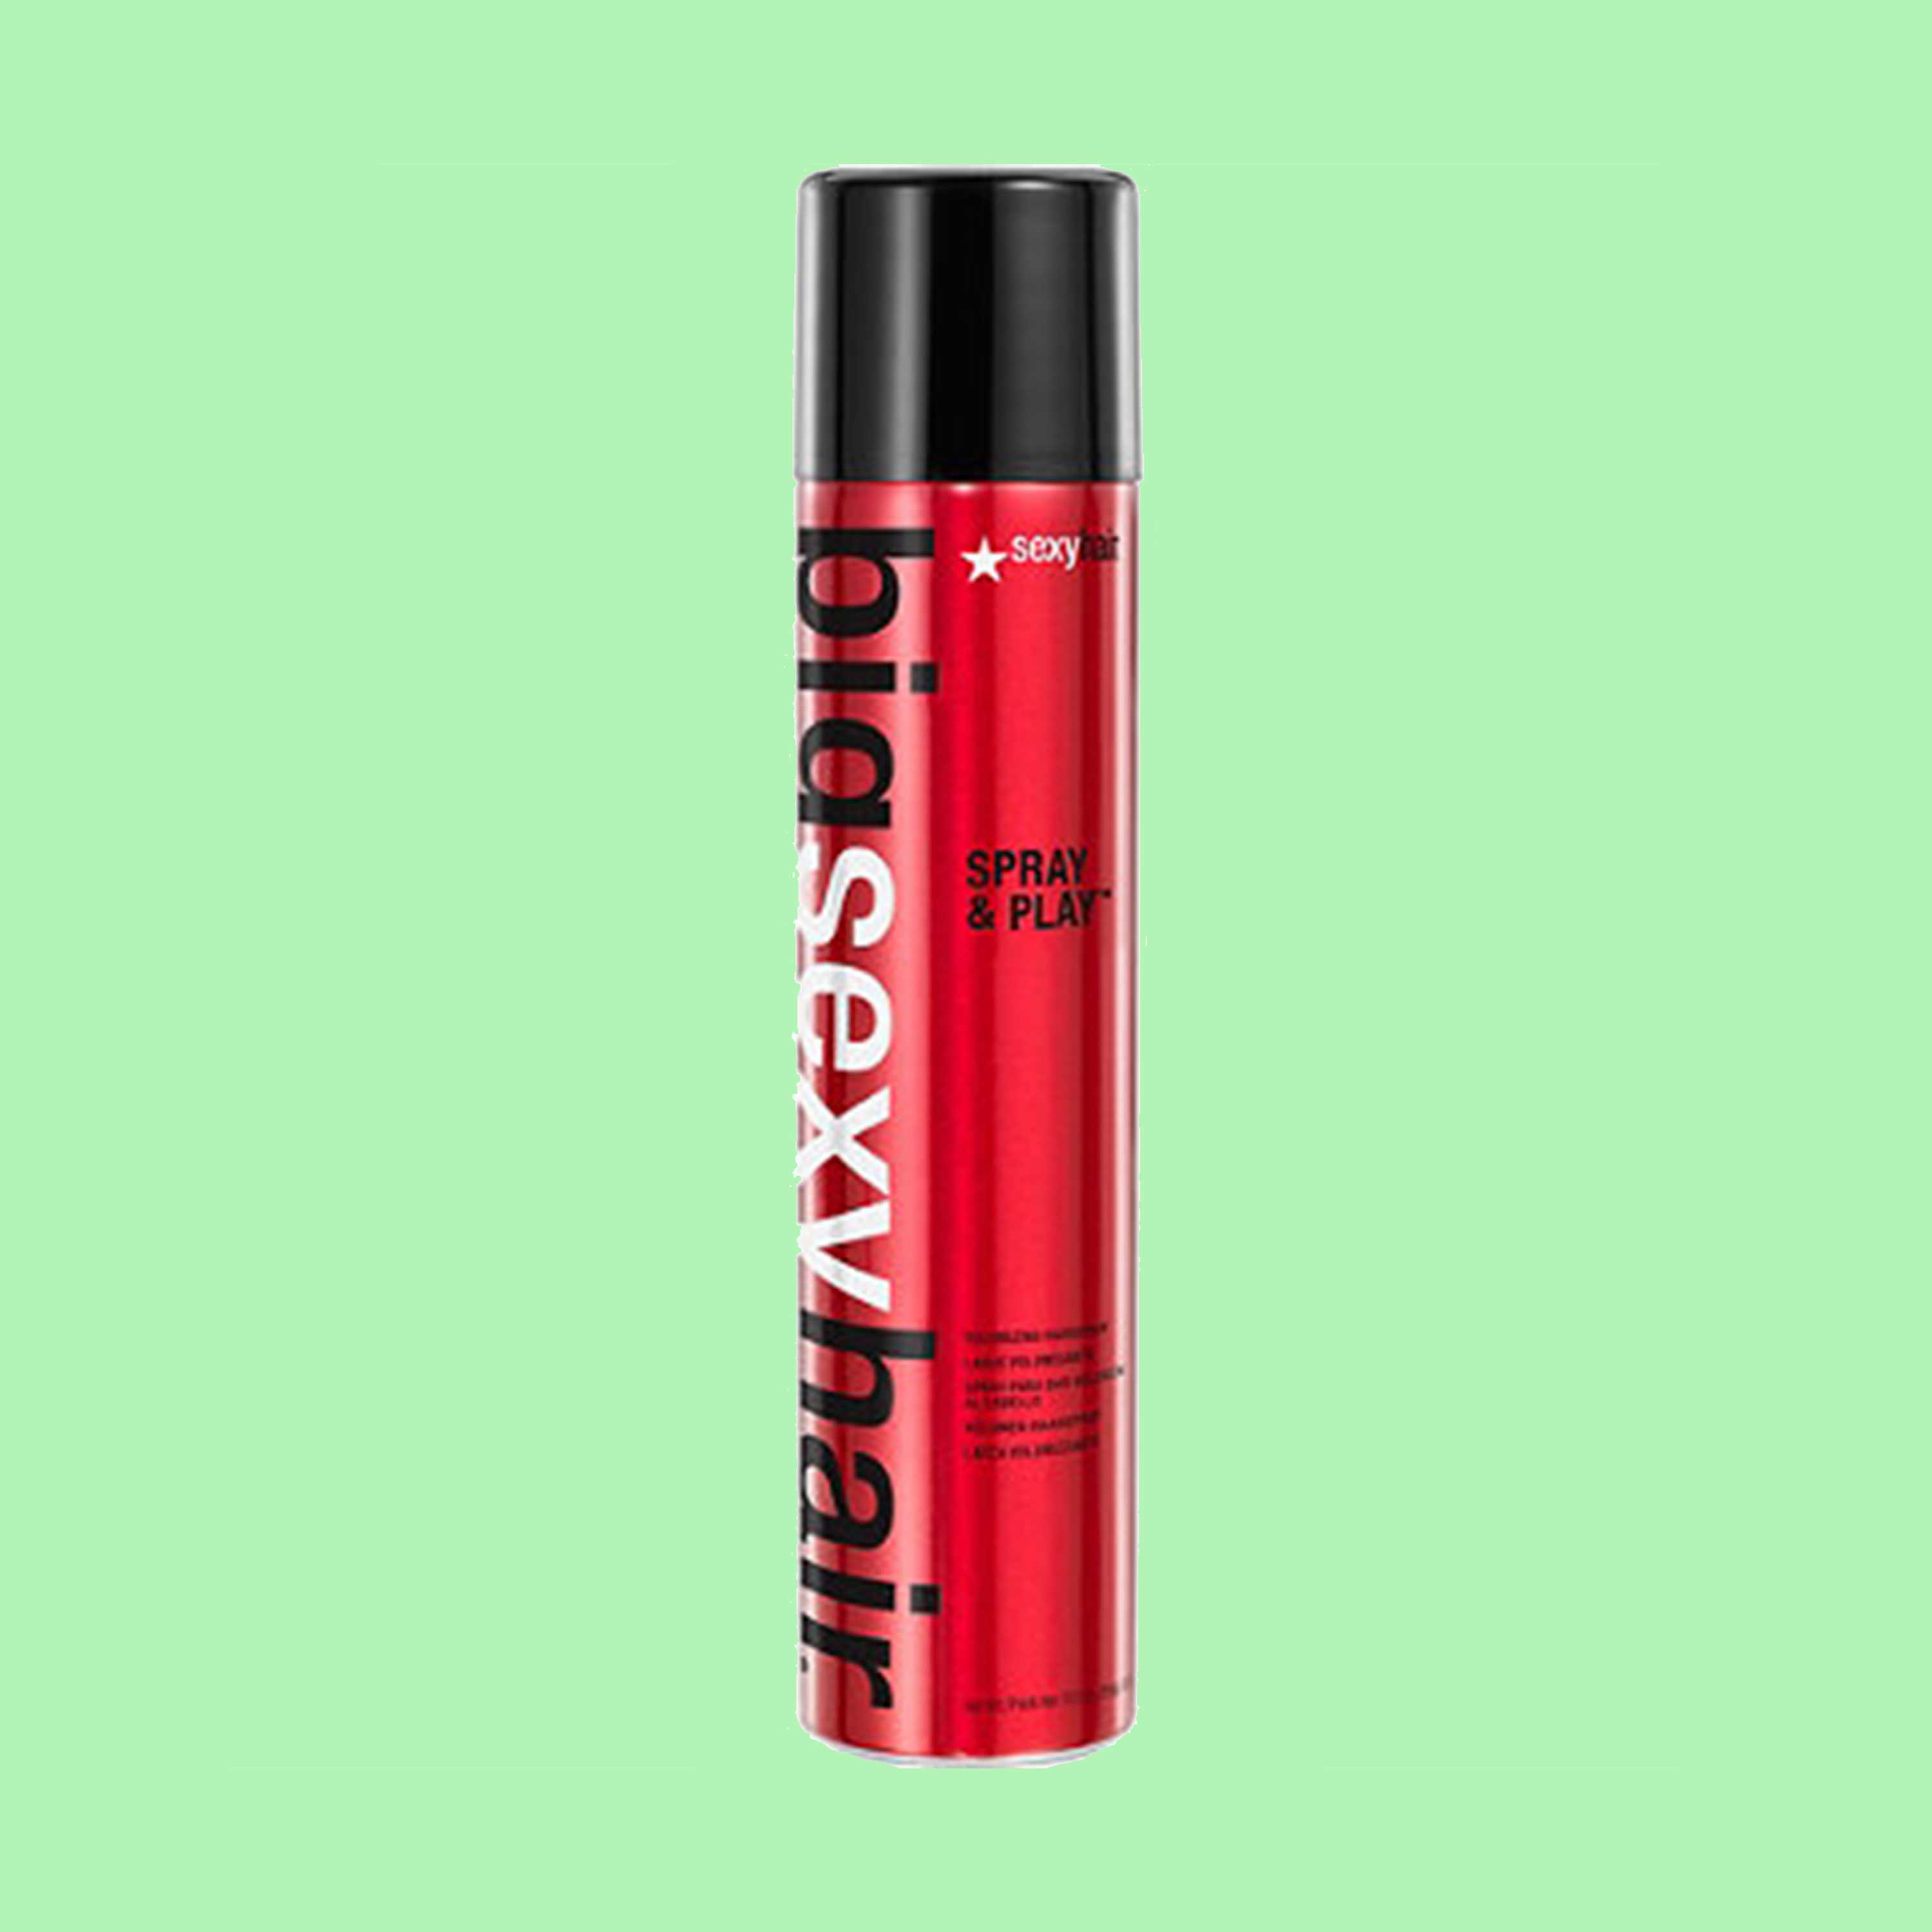 7 Underrated Ways To Use Hairspray On Textured Hair
